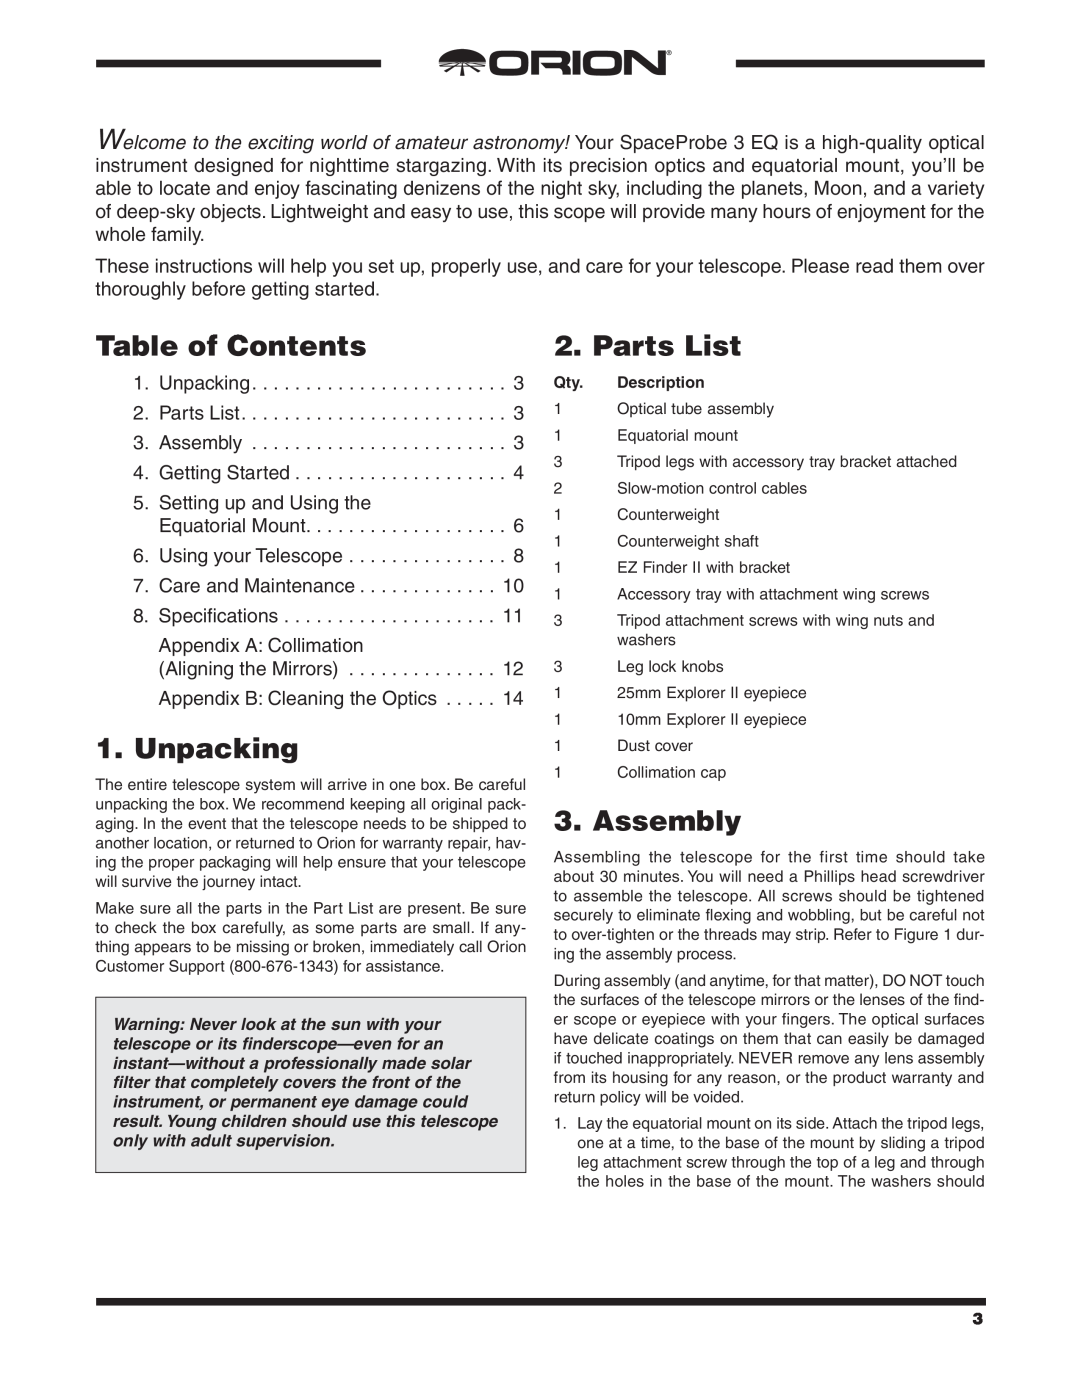 Orion 9843 Table of Contents, Unpacking 2. Parts List 3. Assembly 4. Getting Started, Qty. Description 